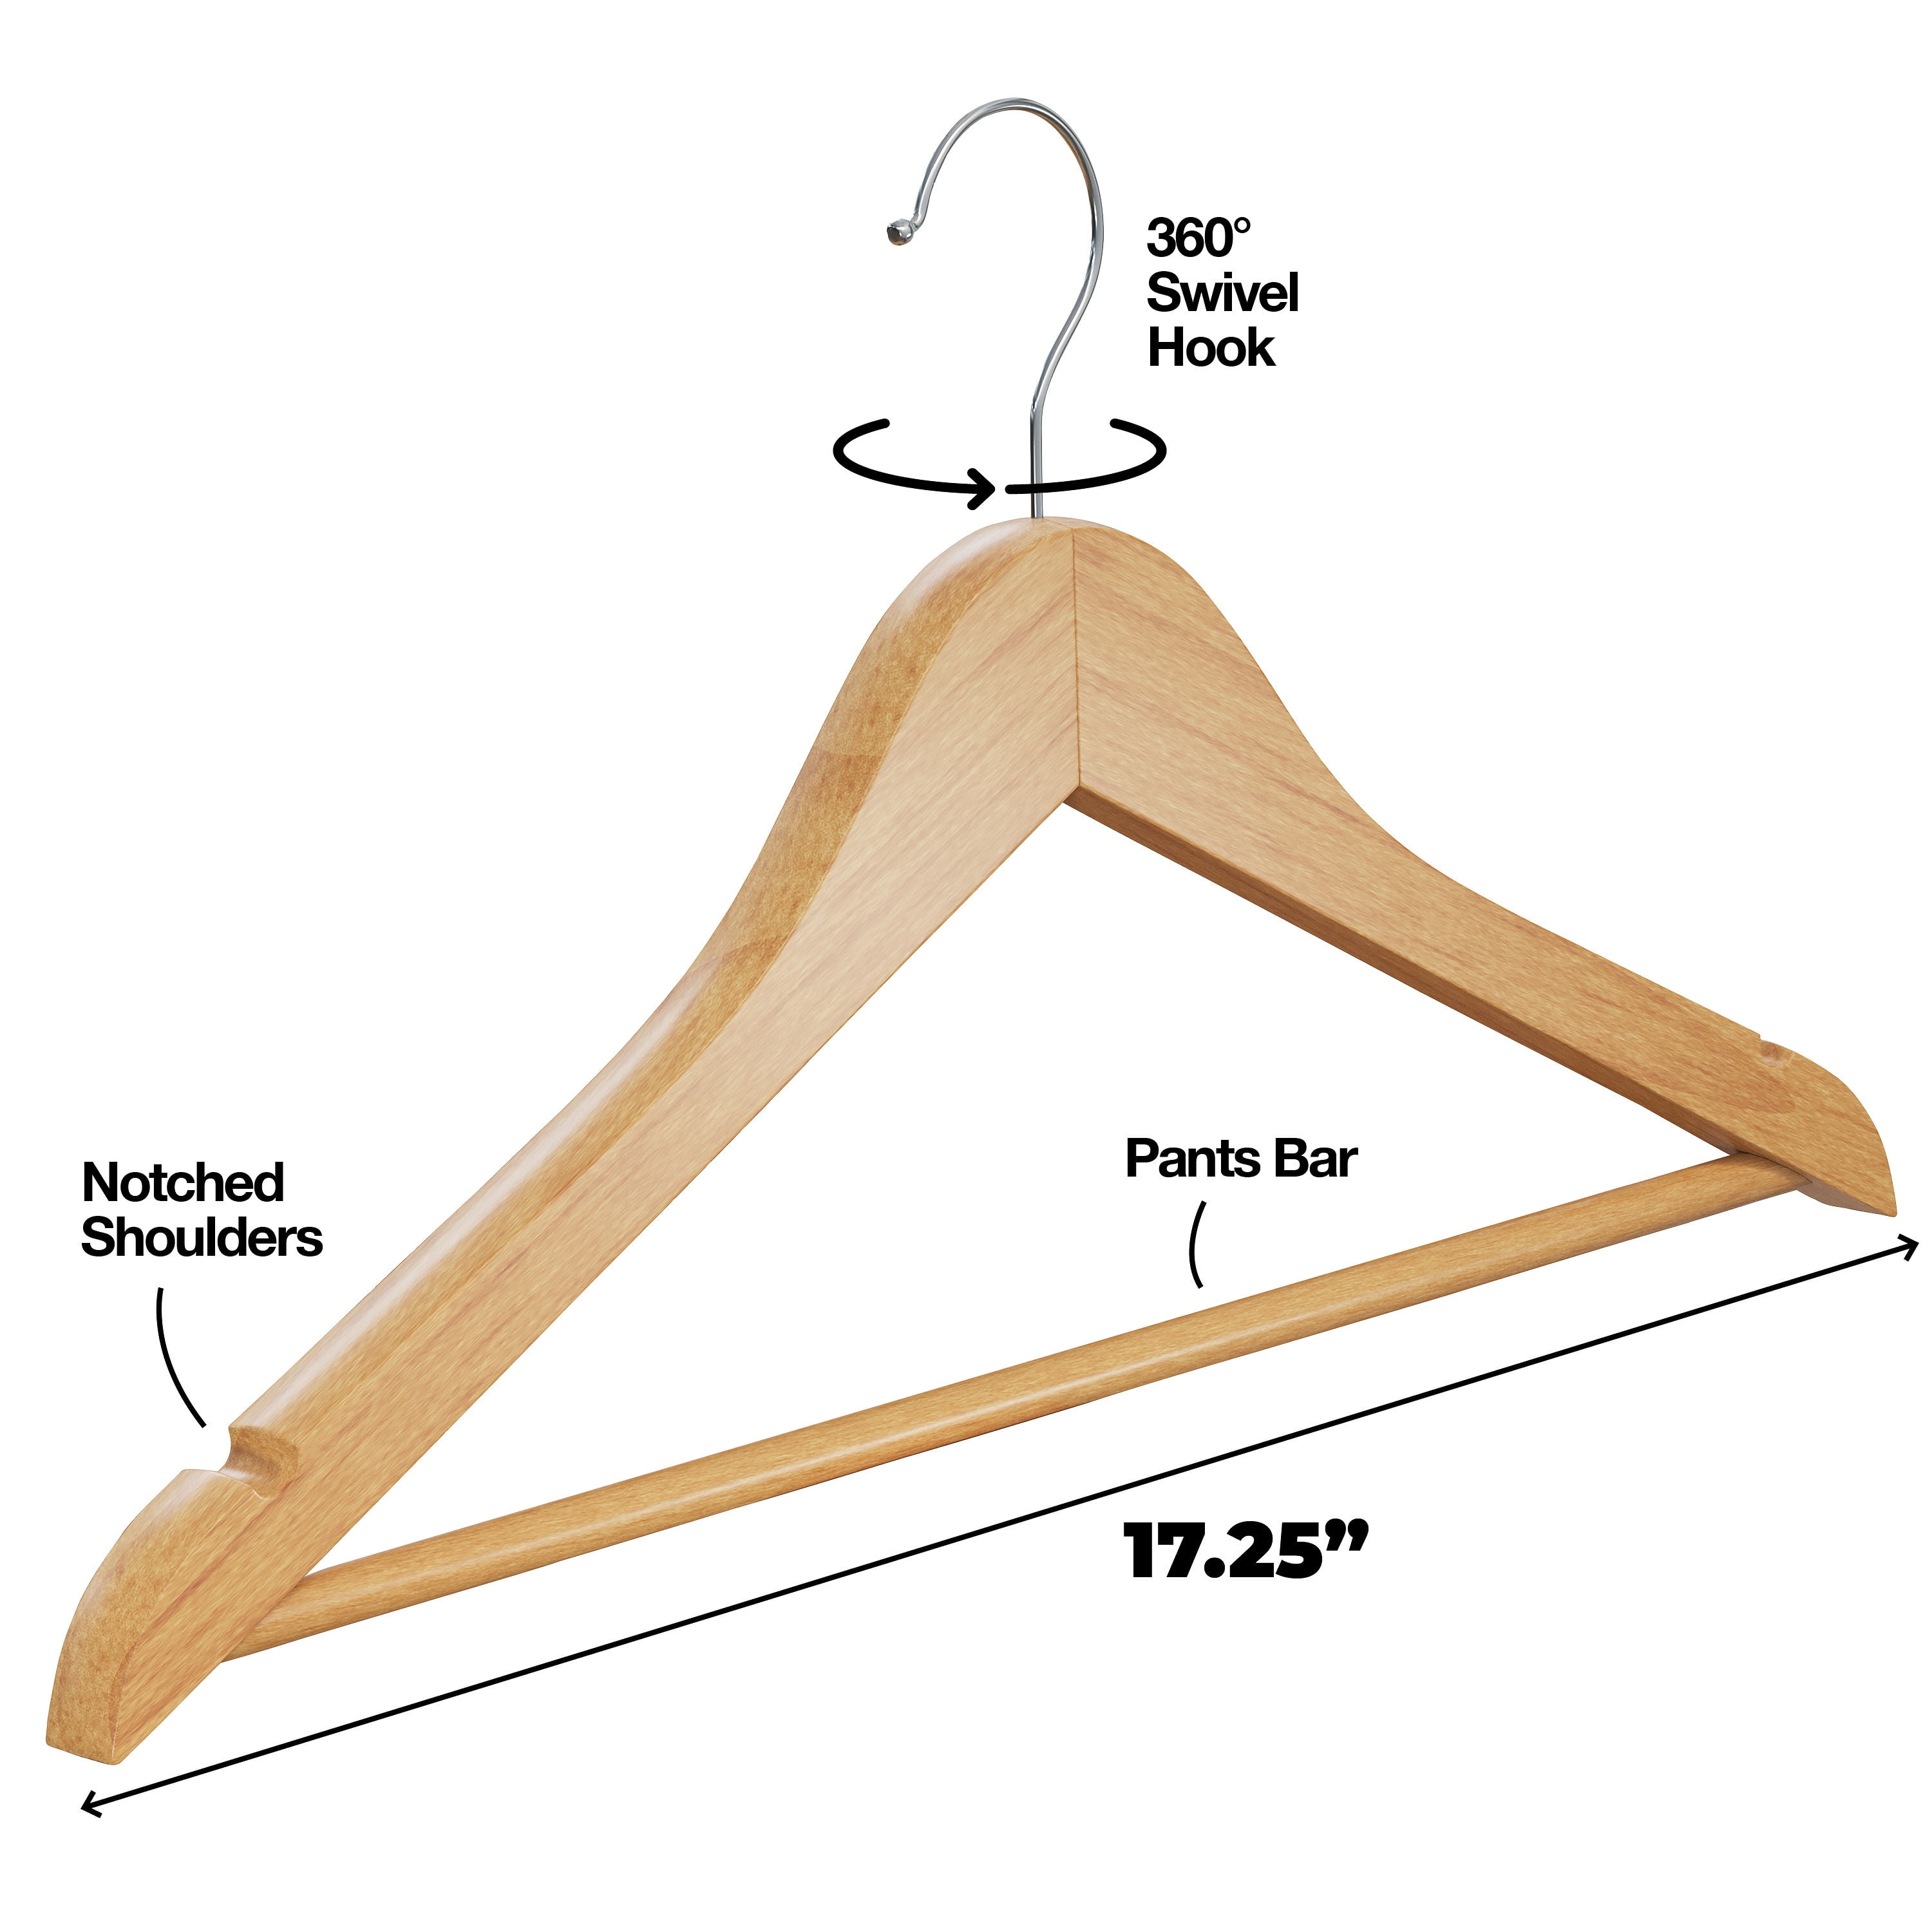 Home-It Natural Wood Clothing Hangers, 20 Pack 